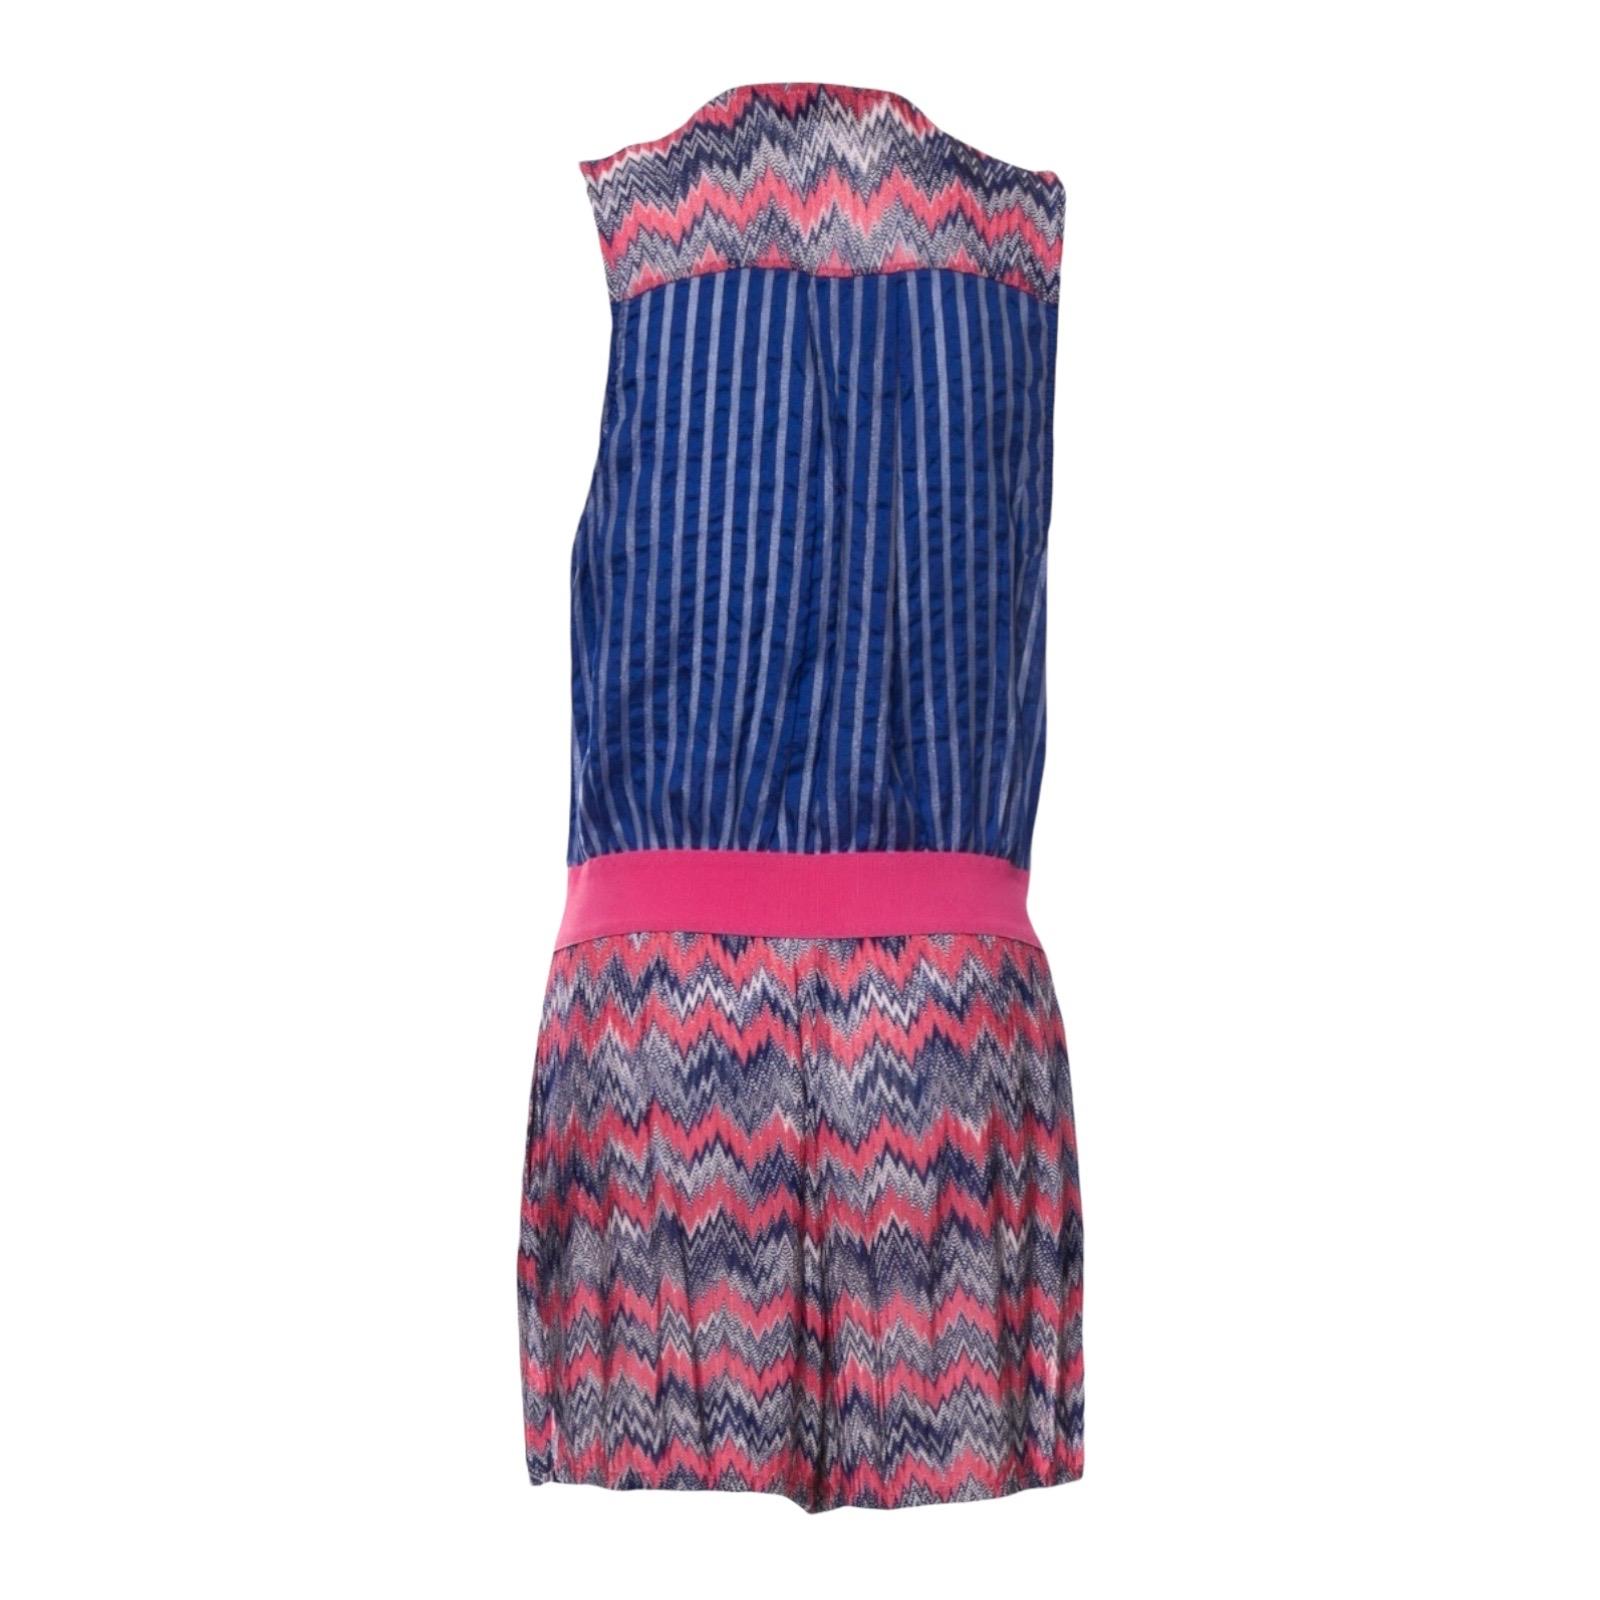 Designed by Missoni in its signature weave pattern, this playsuit is too stylish to resist! 
It comes with a pink and blue striped top with buttoned front. It features a round neckline and sleeveless arms. The shorts are accented with a pink waist